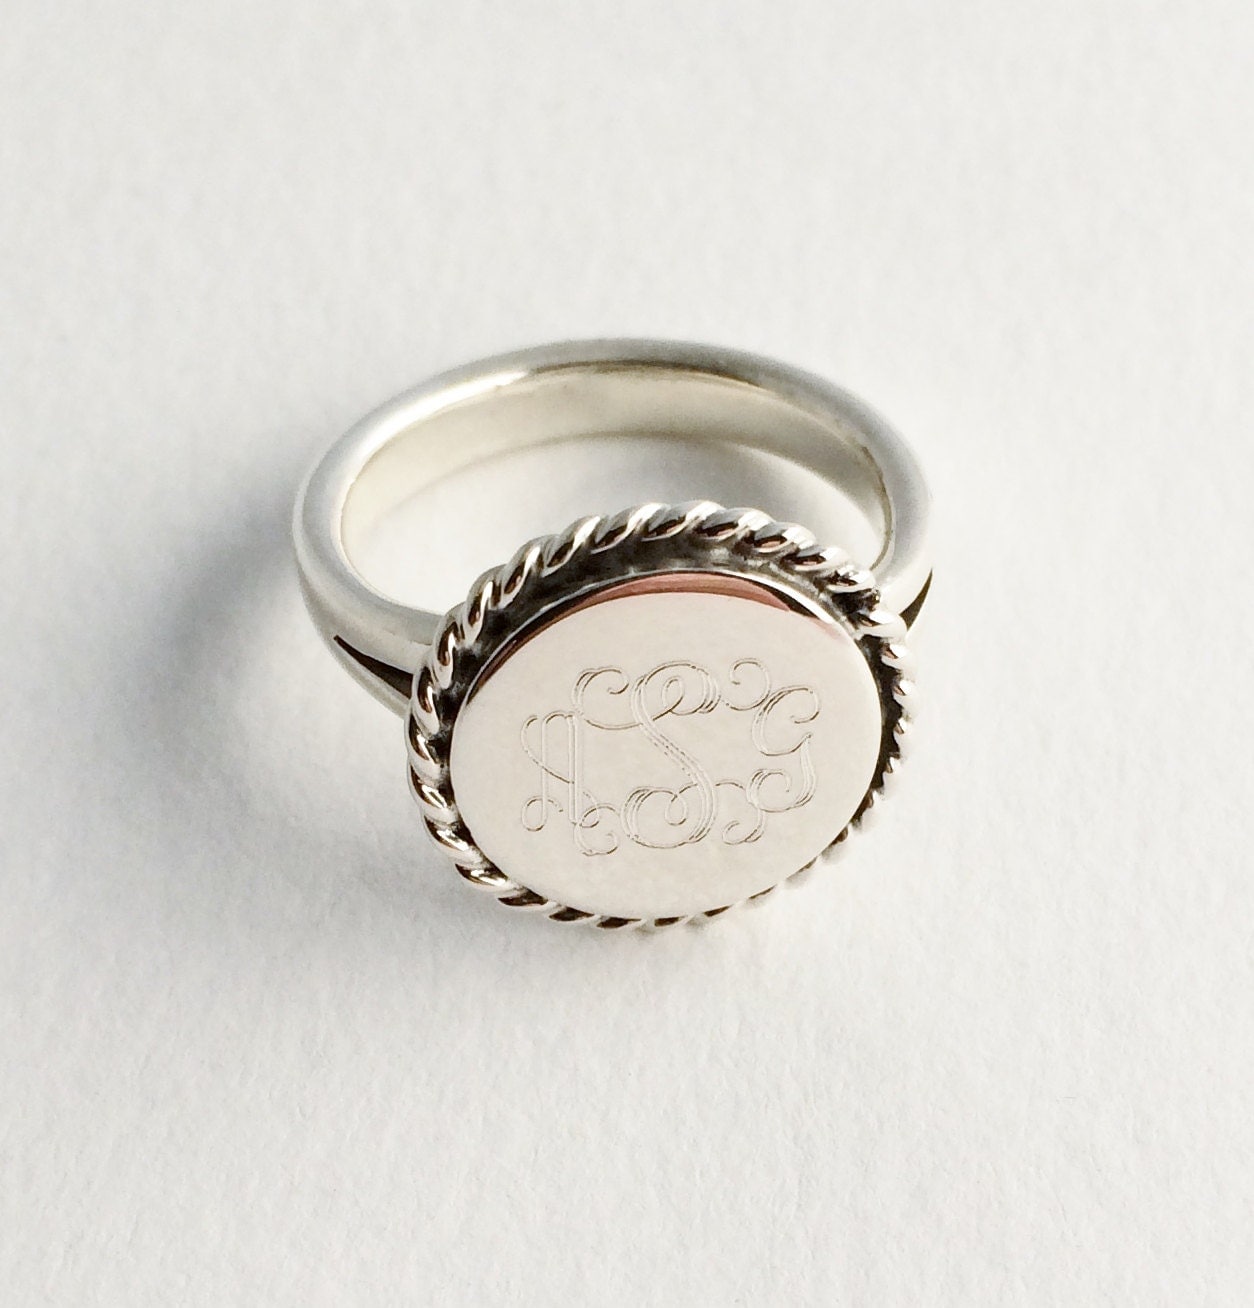 Nautical Rope Monogrammed Ring in Sterling Silver by netexchange